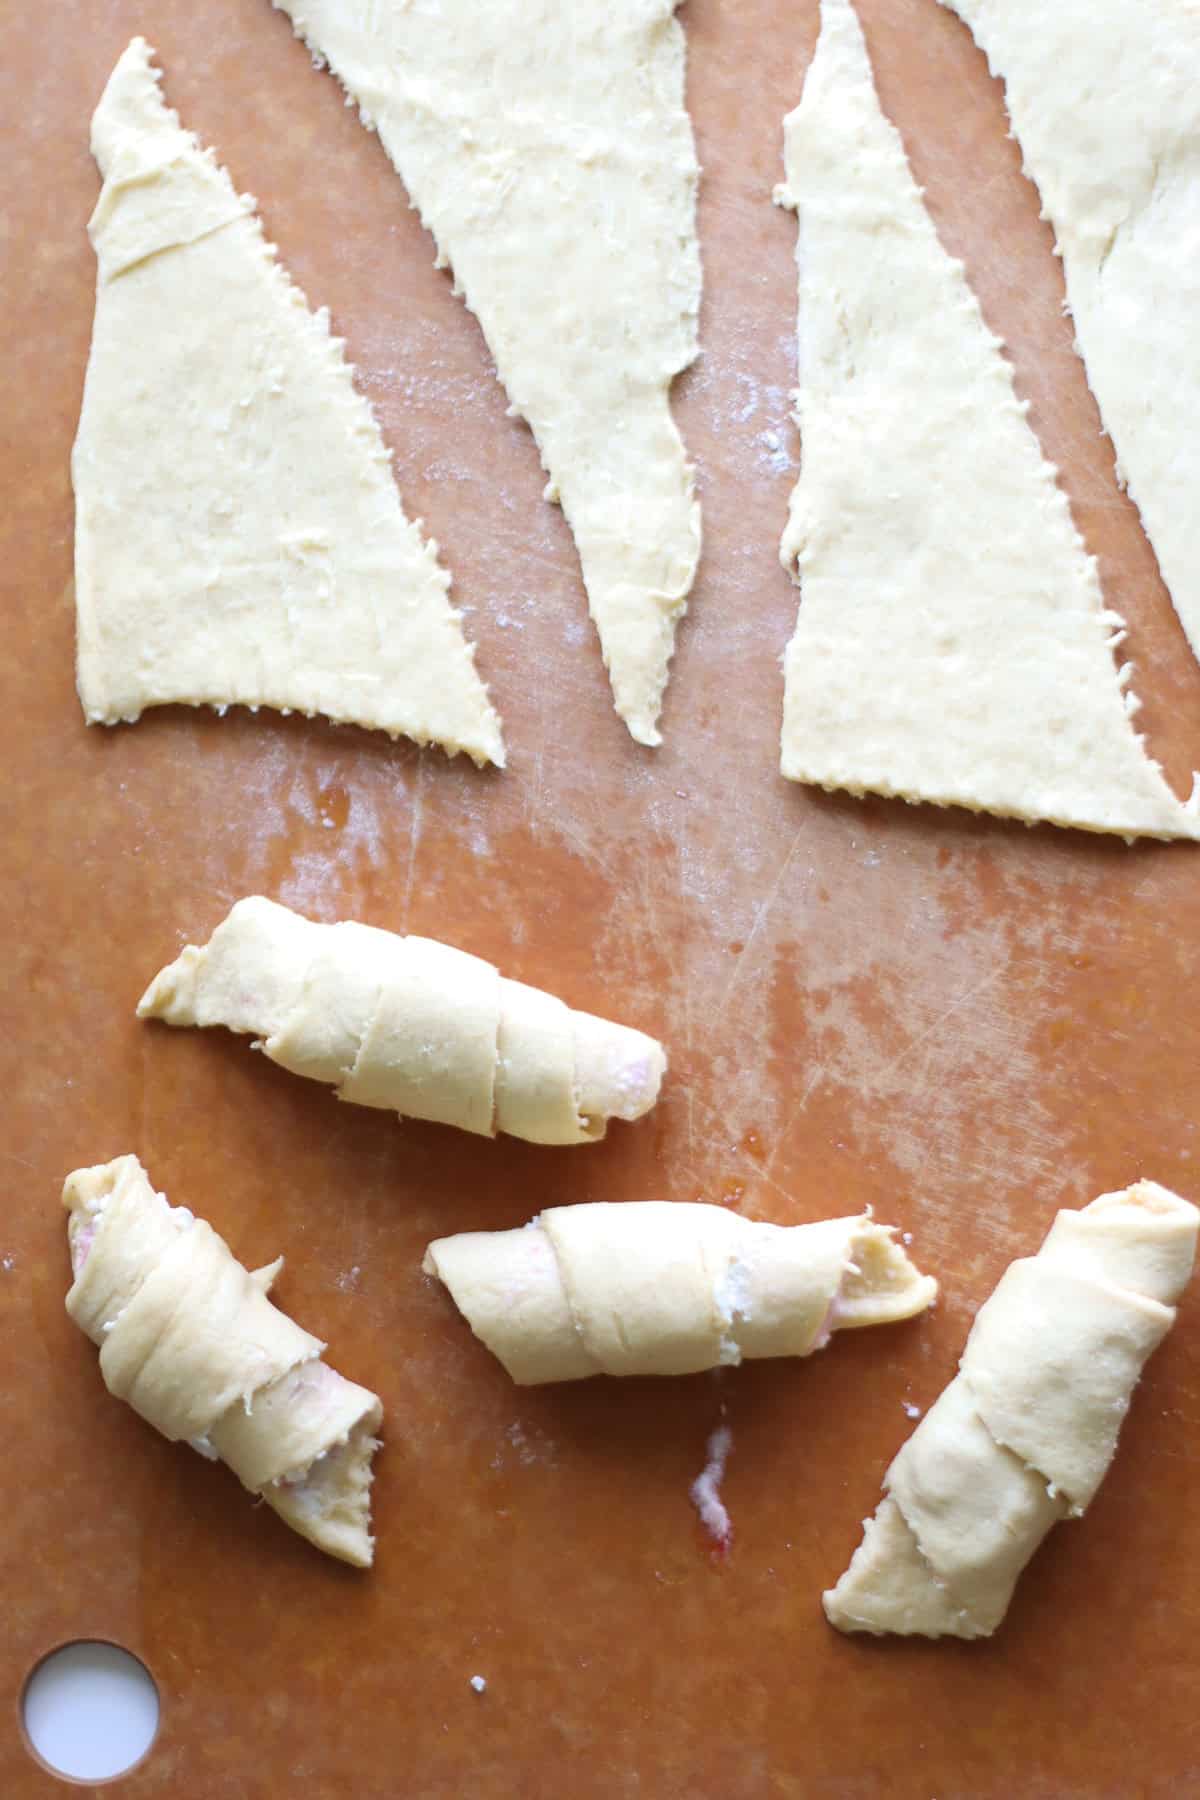 Crescent rolls filled and rolled up.